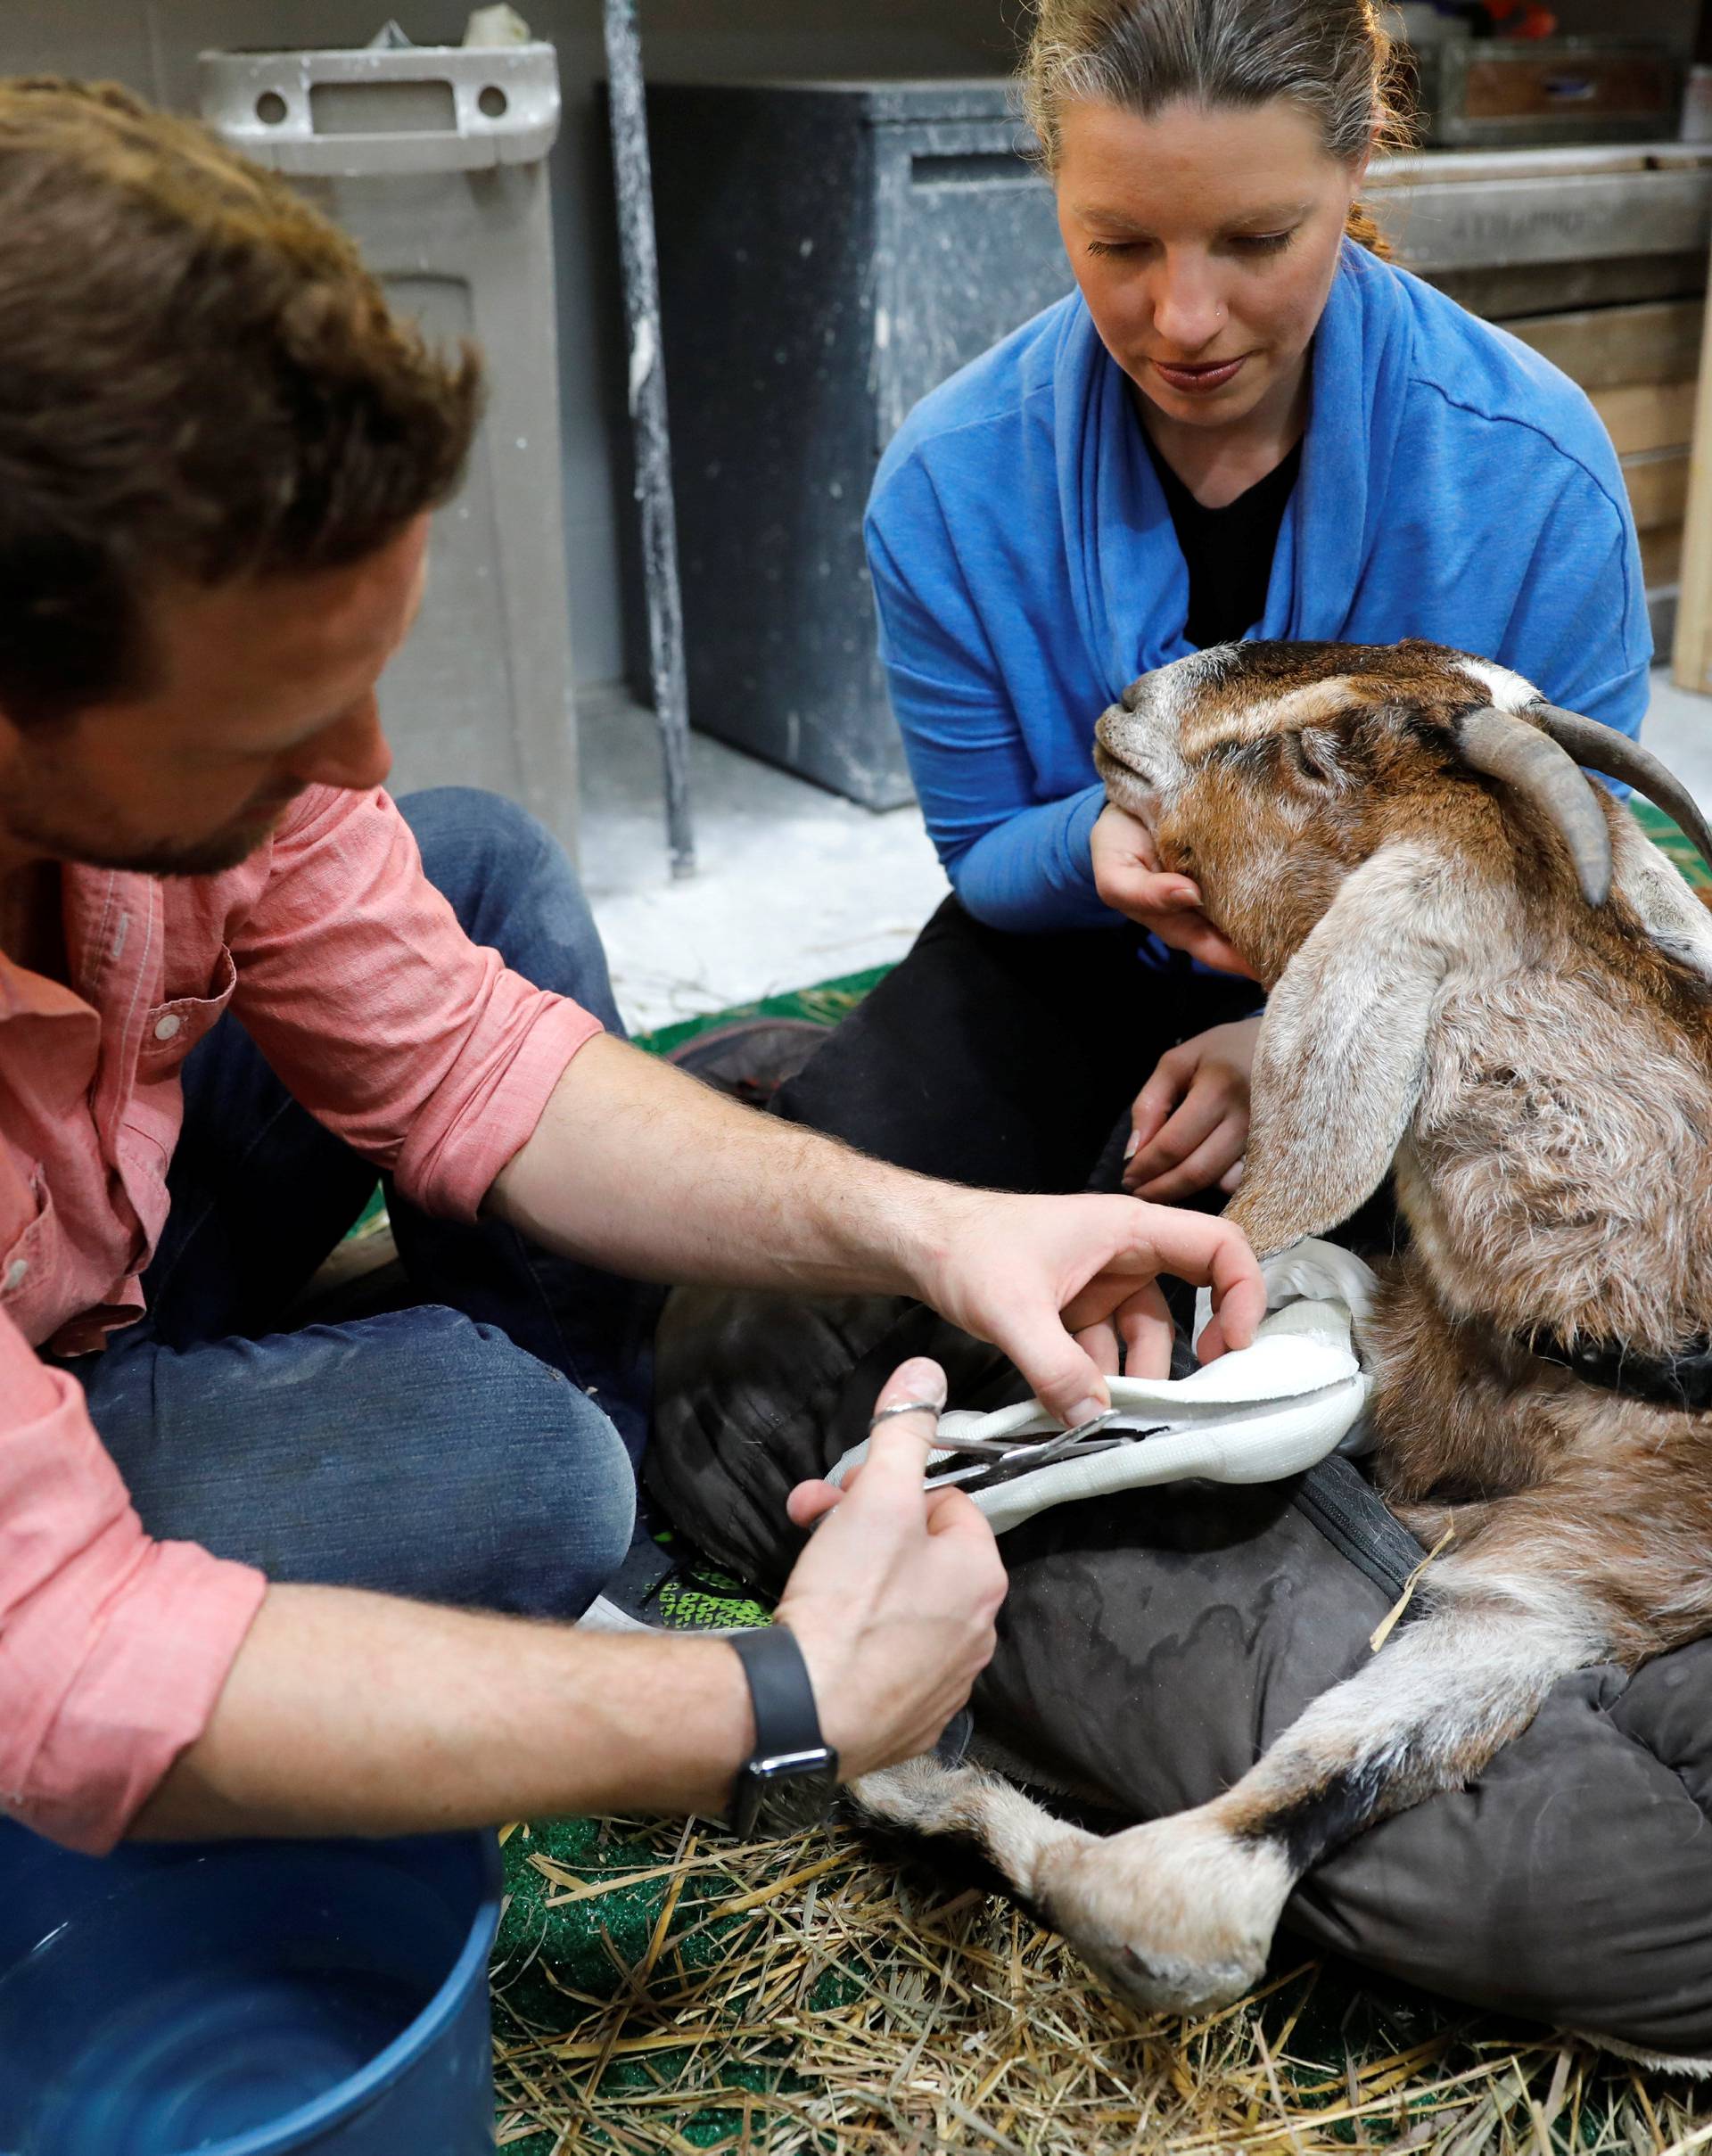 Goat is treated by Derrick Campana in Sterling, Virginia